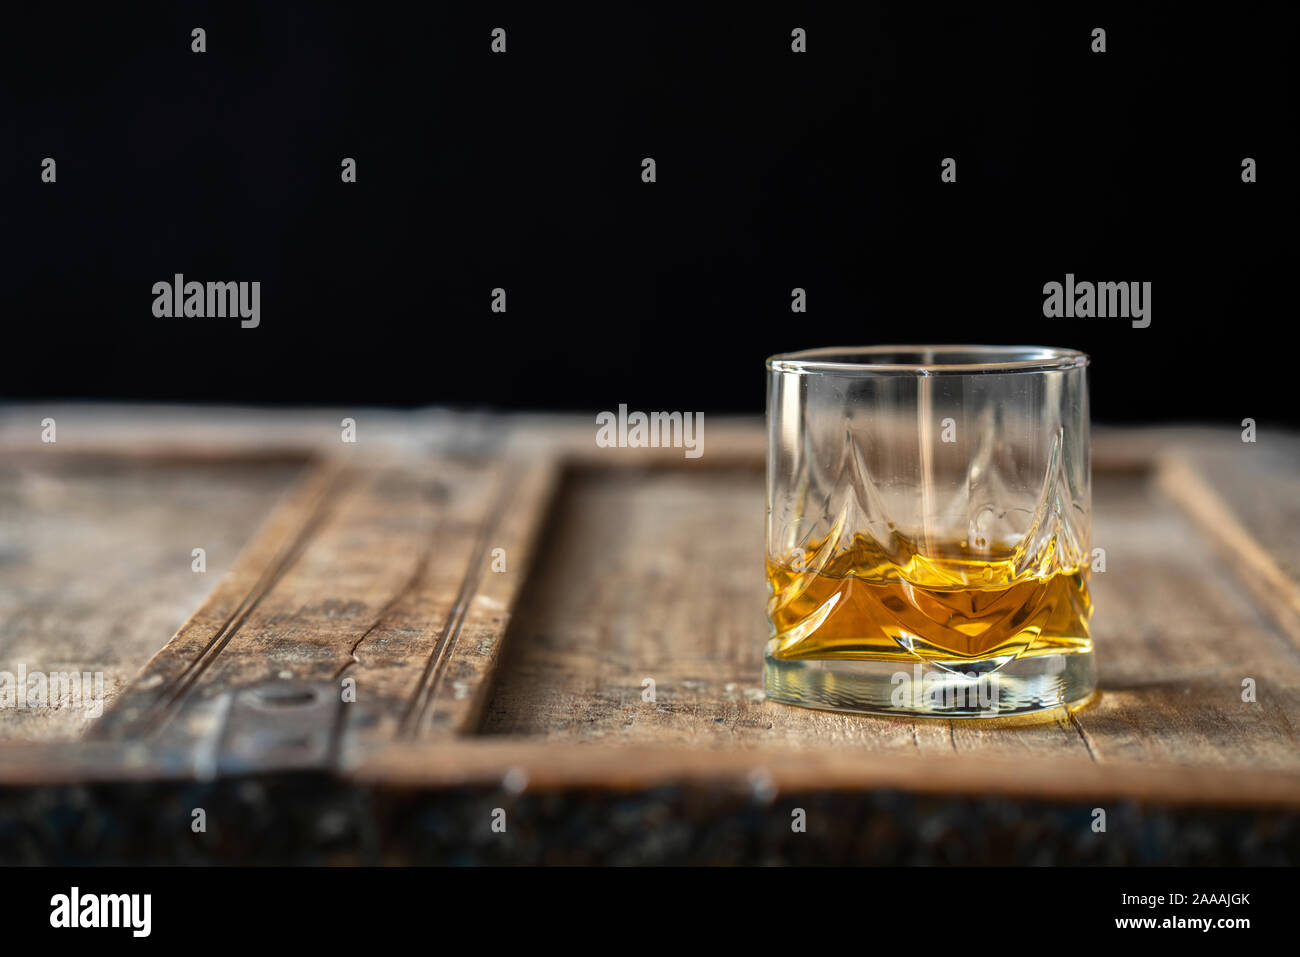 Whisky glass on an old used wooden table, dark background Stock Photo